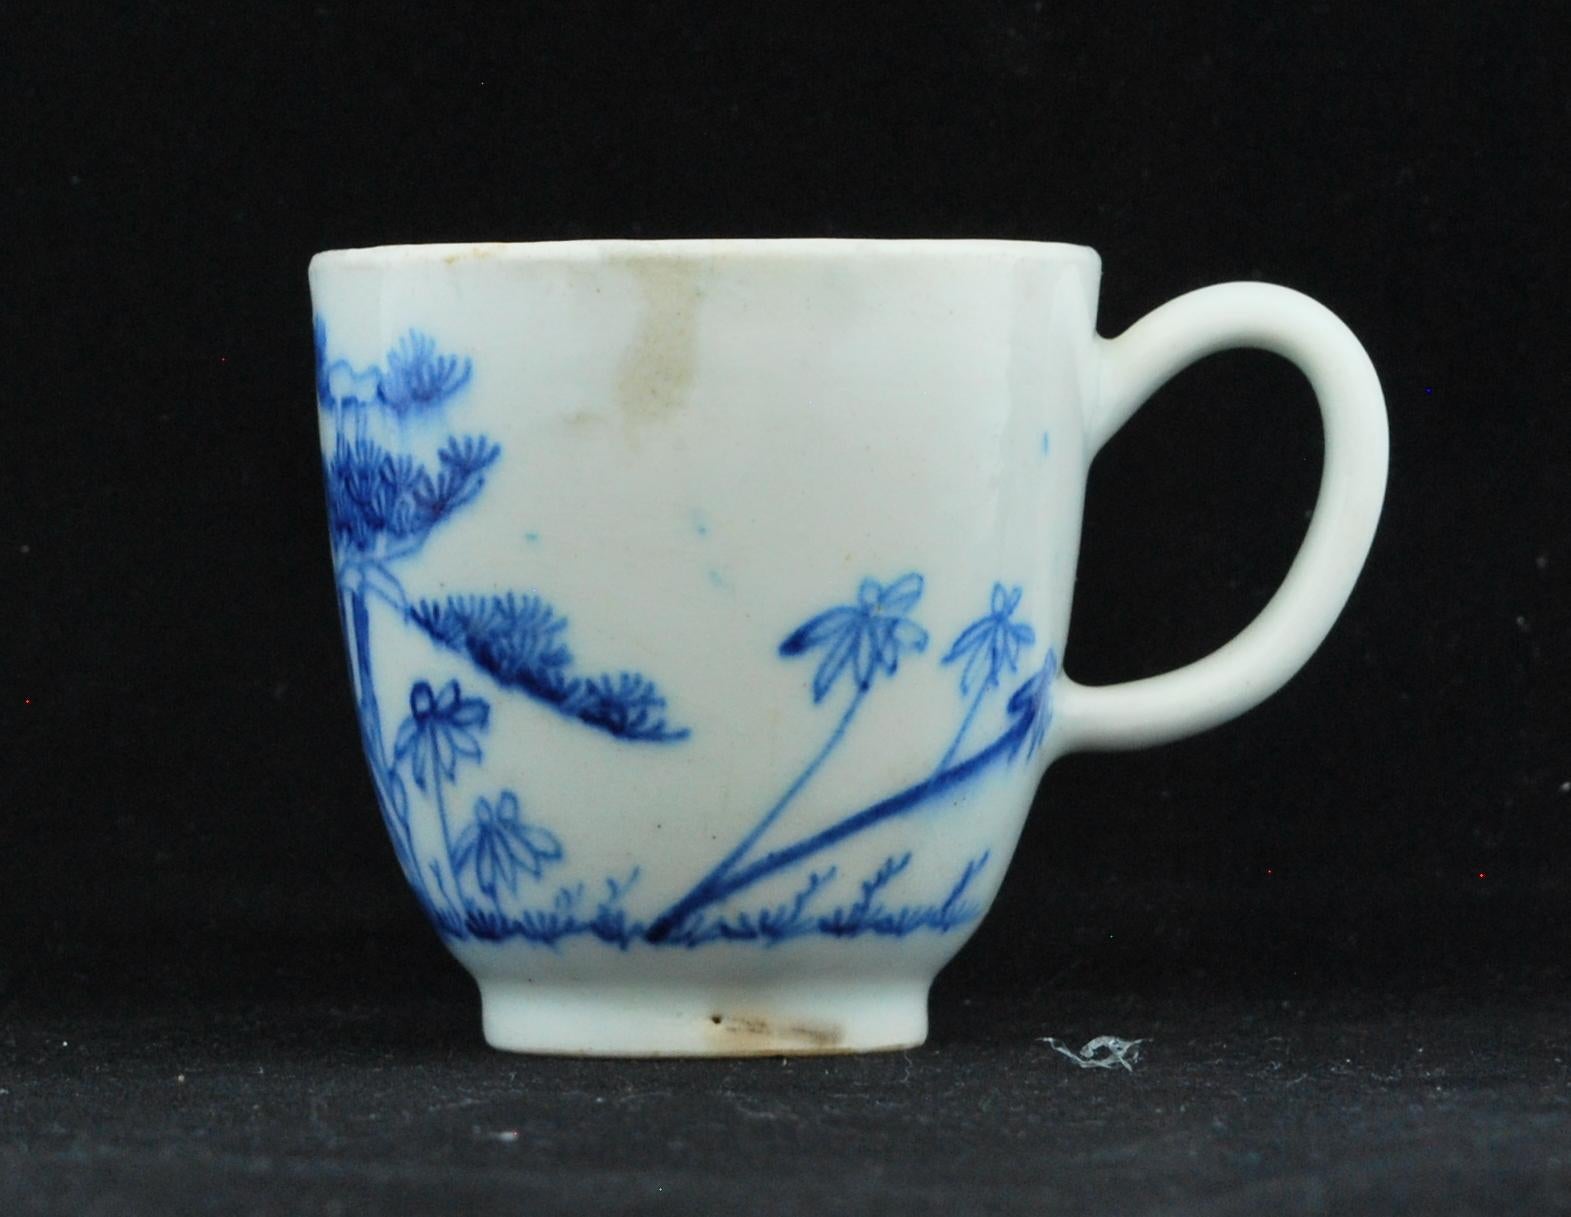 Of Chinese export form with loop handle; the body imaginatively painted in a bright ‘early blue’ underglaze with pine, rock and bamboo after the Chinese. Yellow tinged body; clear glaze with some blue bleeding to glaze and black speckling.